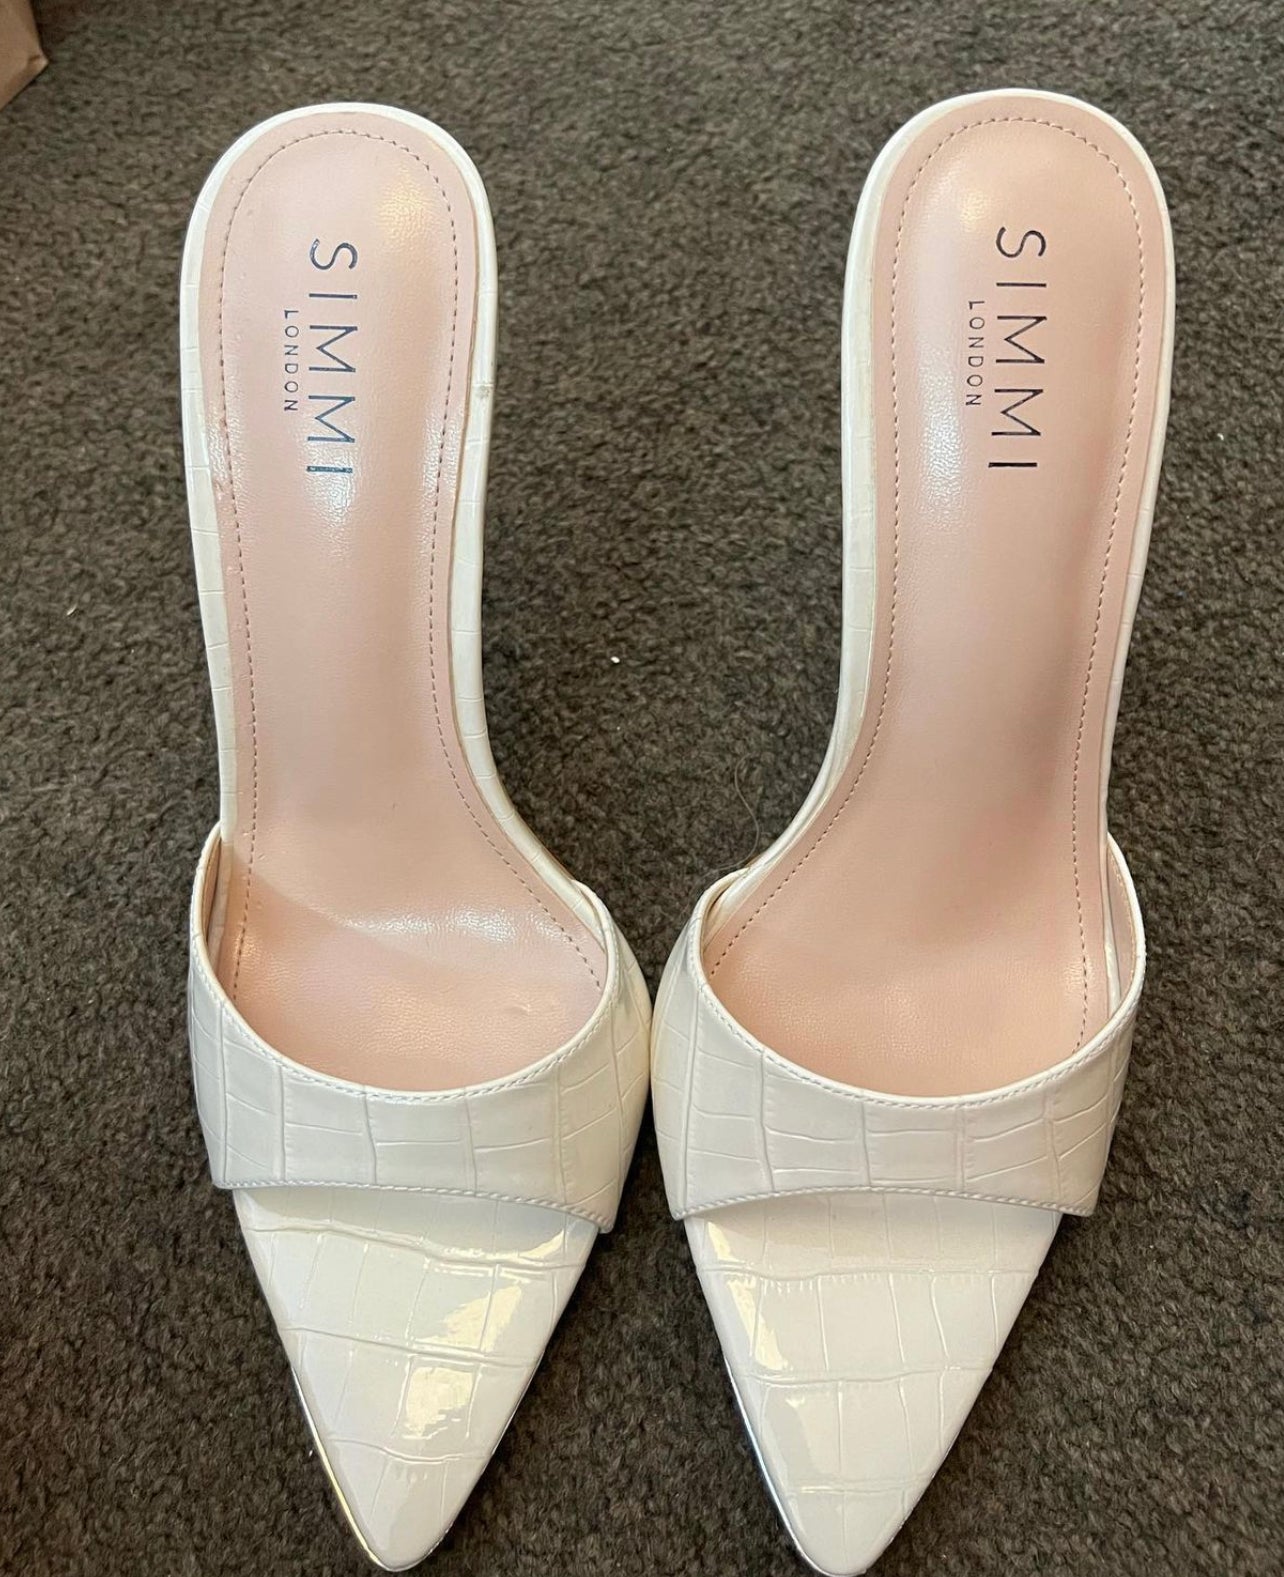 Simmi London Heels (Size 10) FOR SALE